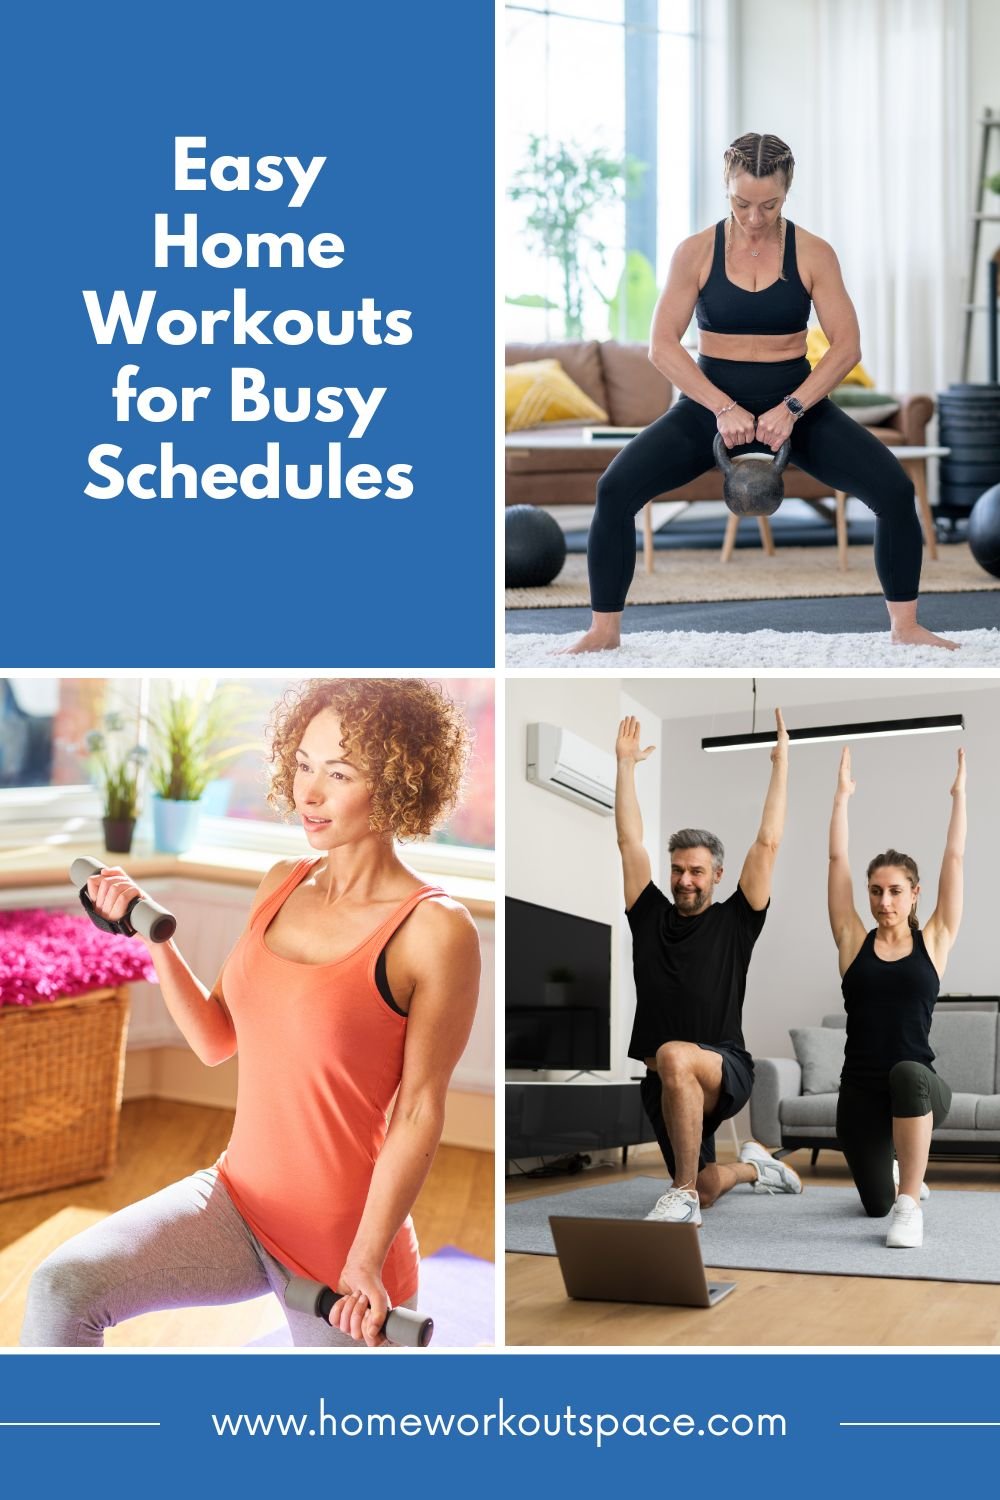 Easy Home Workouts for Busy Schedules